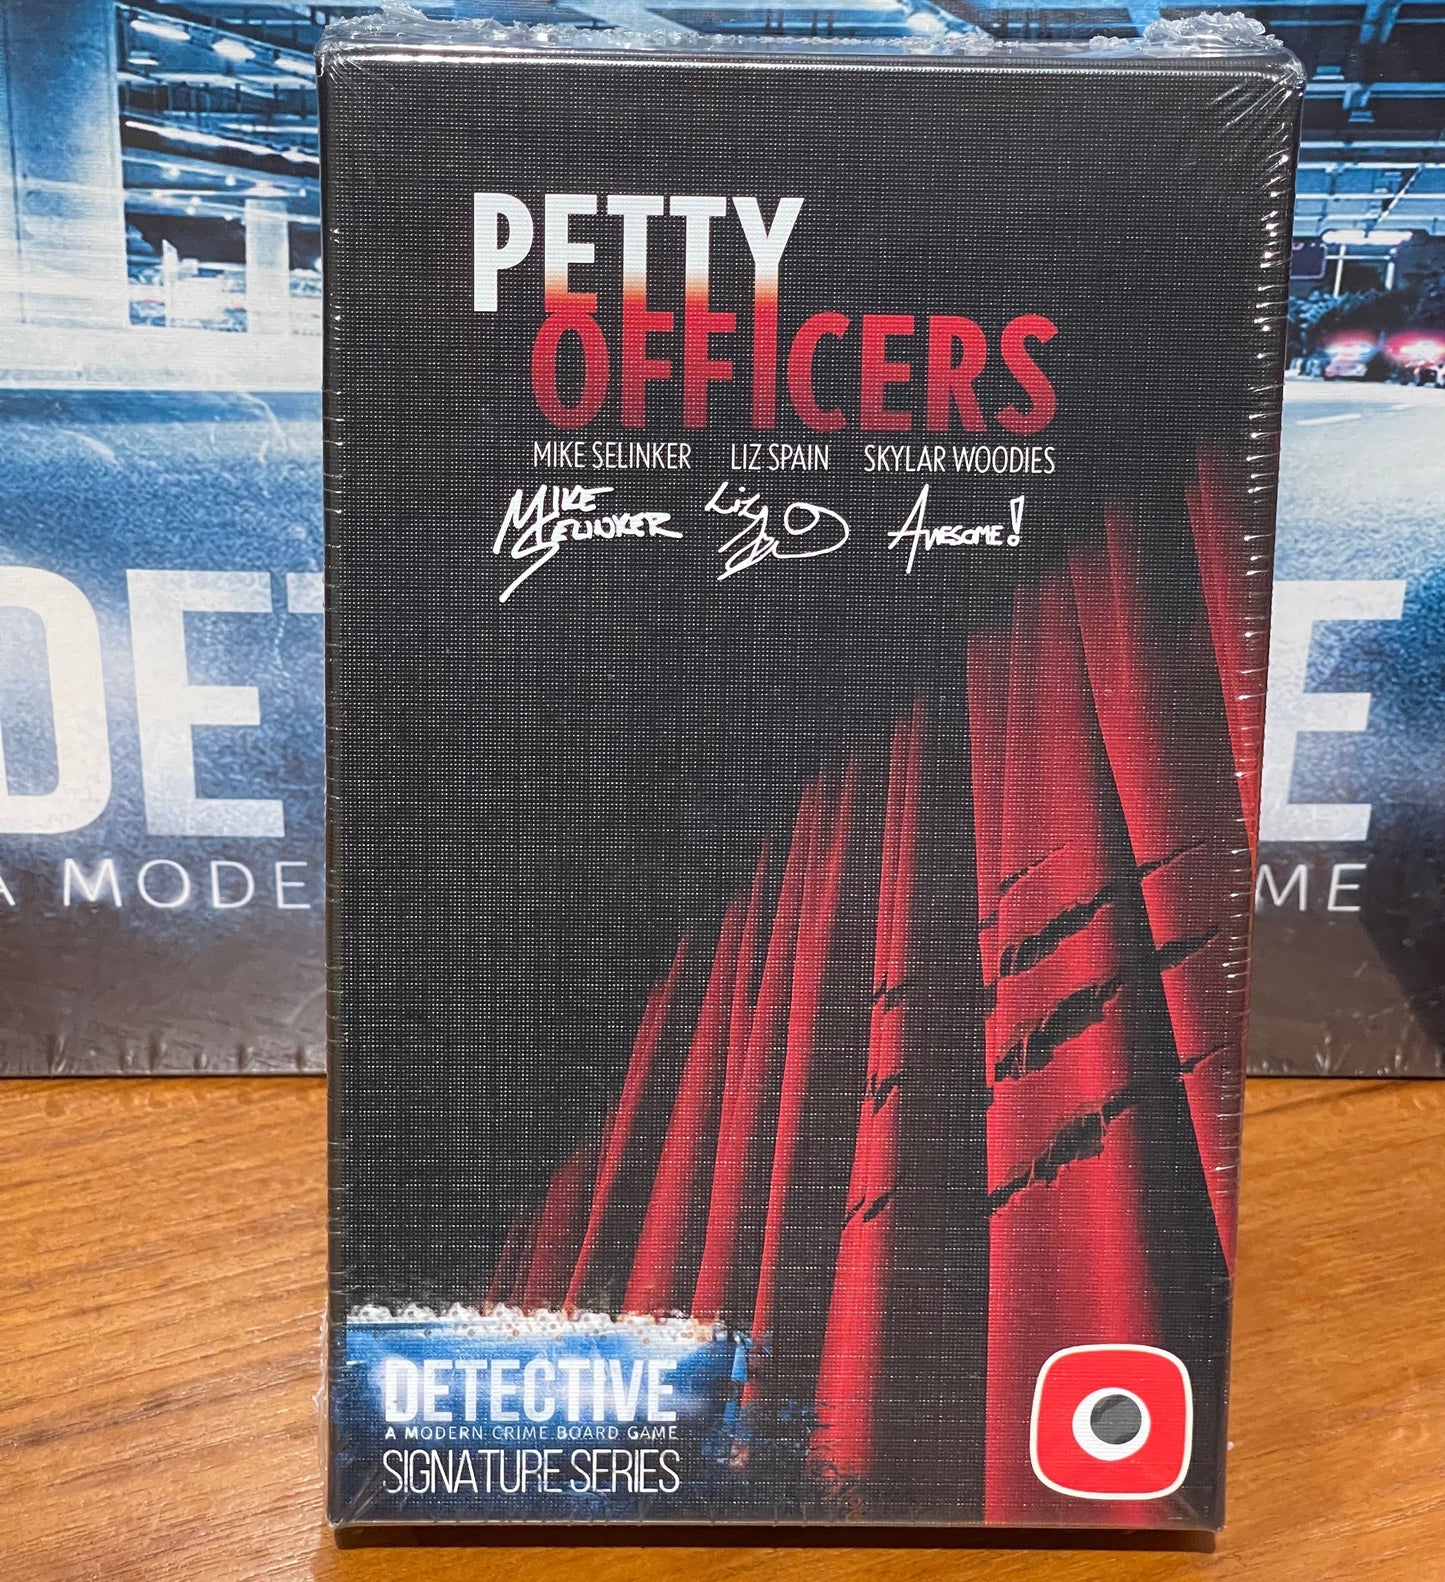 Petty Officers - Expansion set for Detective: A Modern Crime Board Game.  The expansion was written by famous Mike Selinker, together with Liz Spain, Skylar Woodies and the Lone Shark Games team. This time in the investigation the pets will help their owners! Petty Officers is an expansion to the legendary criminal board game Detective by Ignacy Trzewiczek. For sale at Conundrum House and conundrum.house